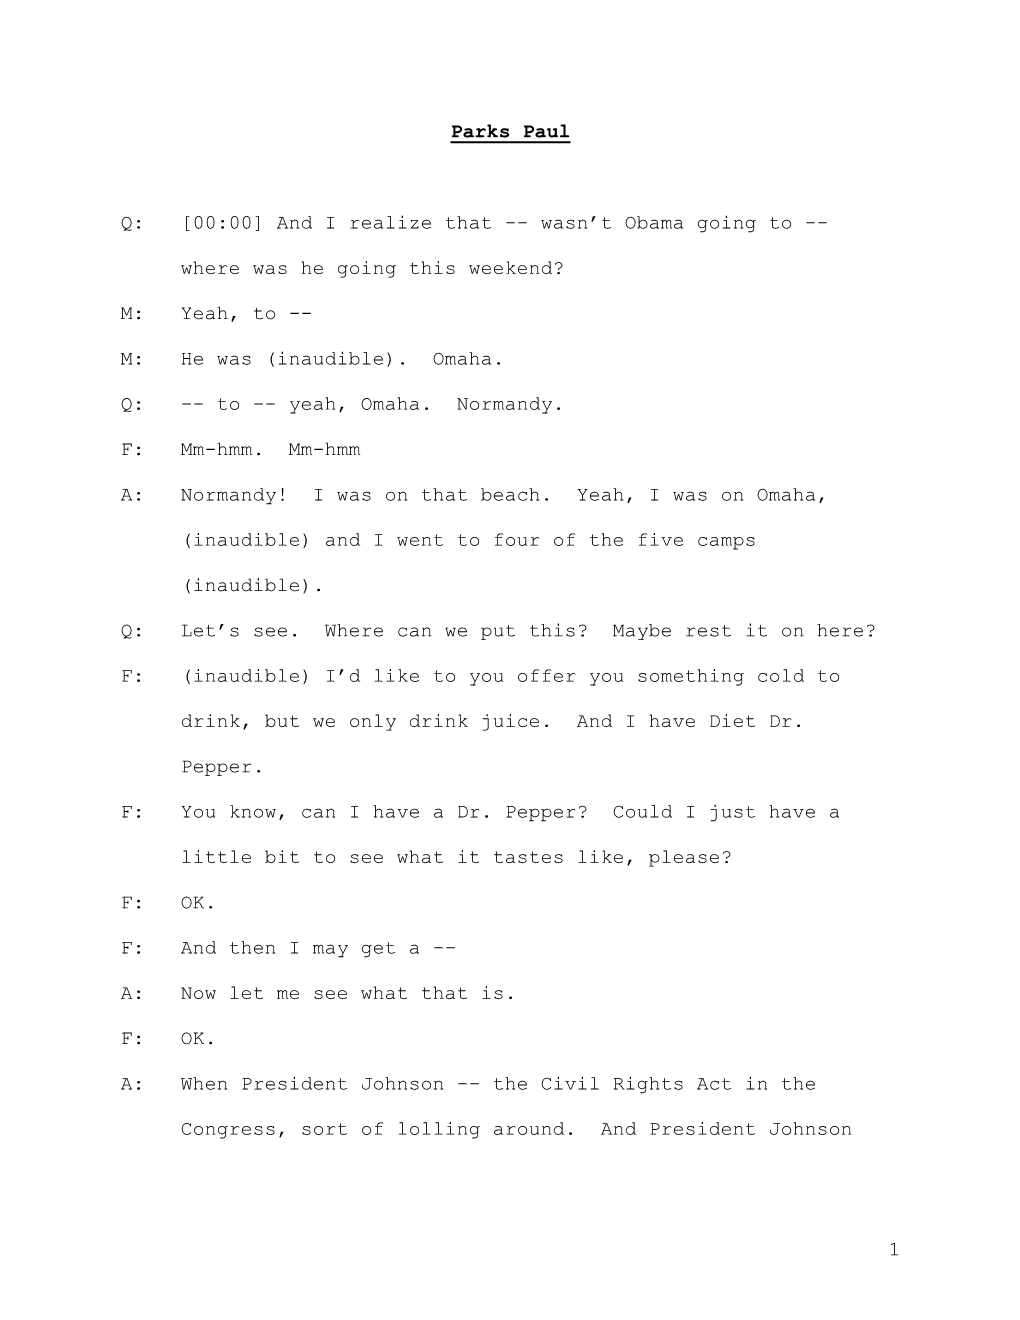 Transcript of Interview with Paul Parks, June 8, 2009